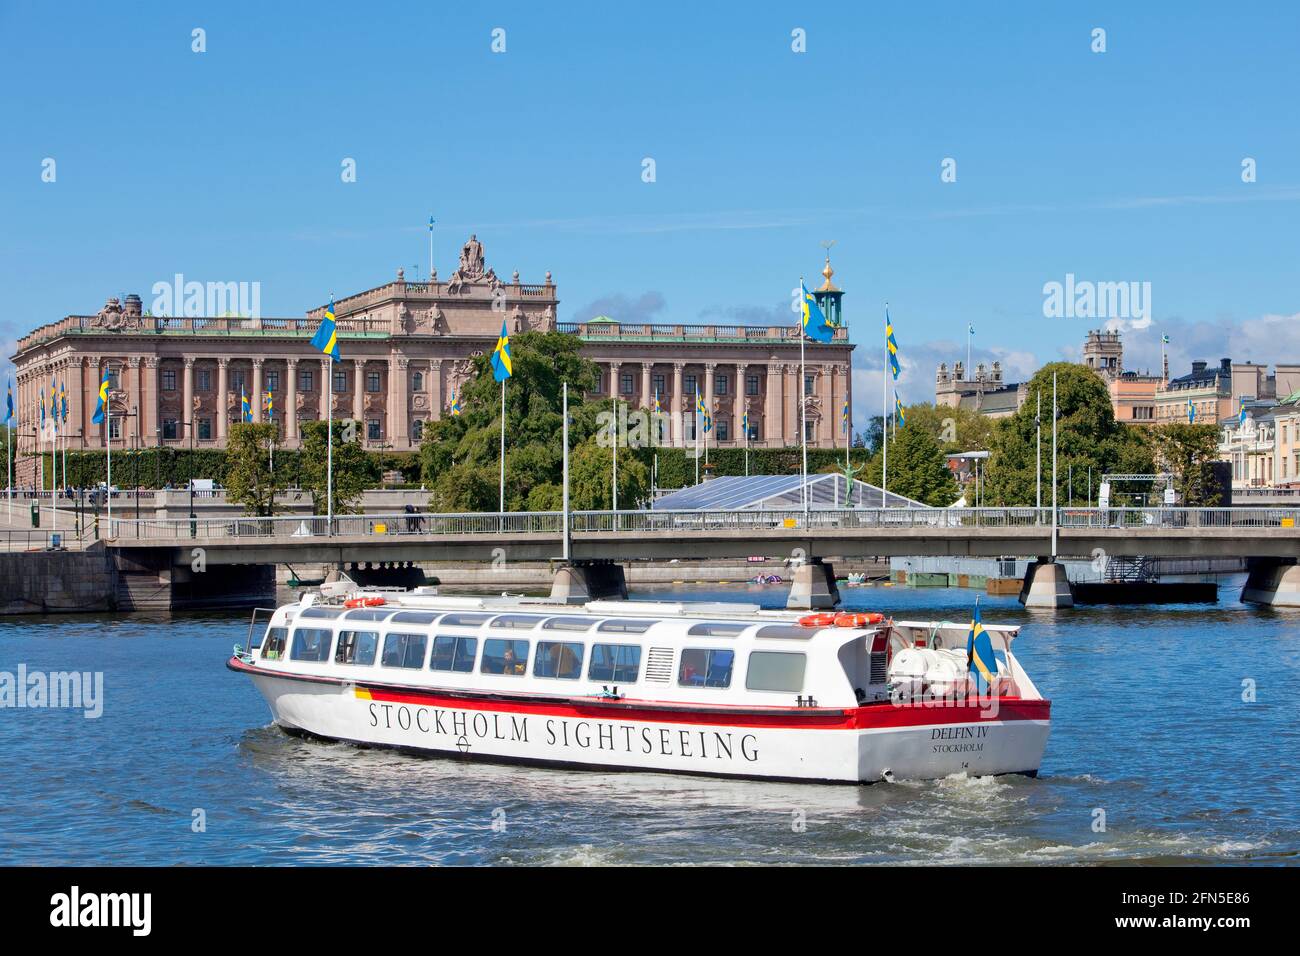 Sweden, Stockholm - The Parliament and tourist sightseeing boat. Stock Photo